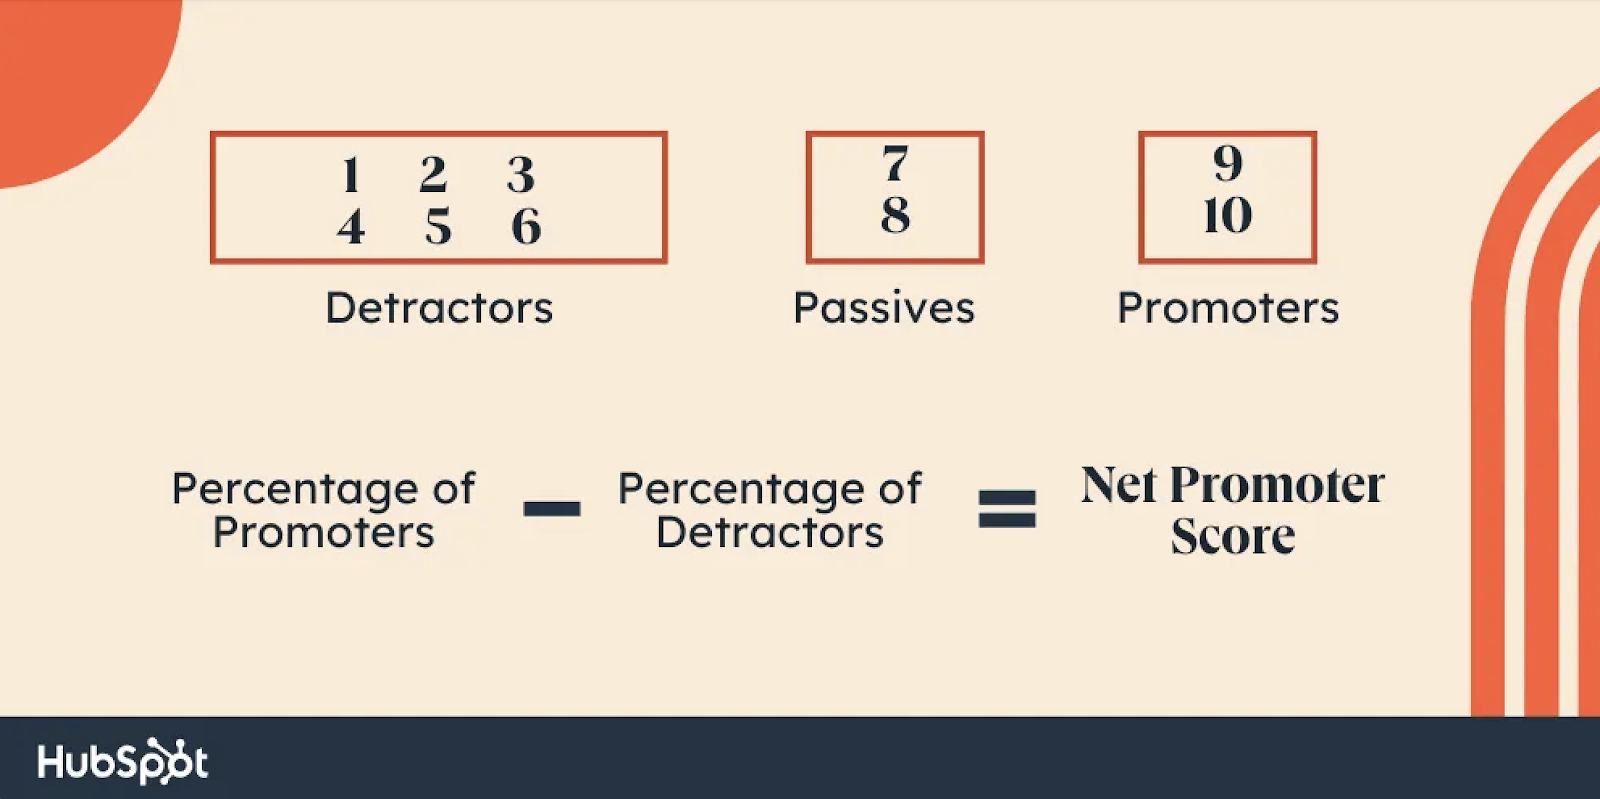 When measuring customer success, don’t overlook your Net Promoter Score.